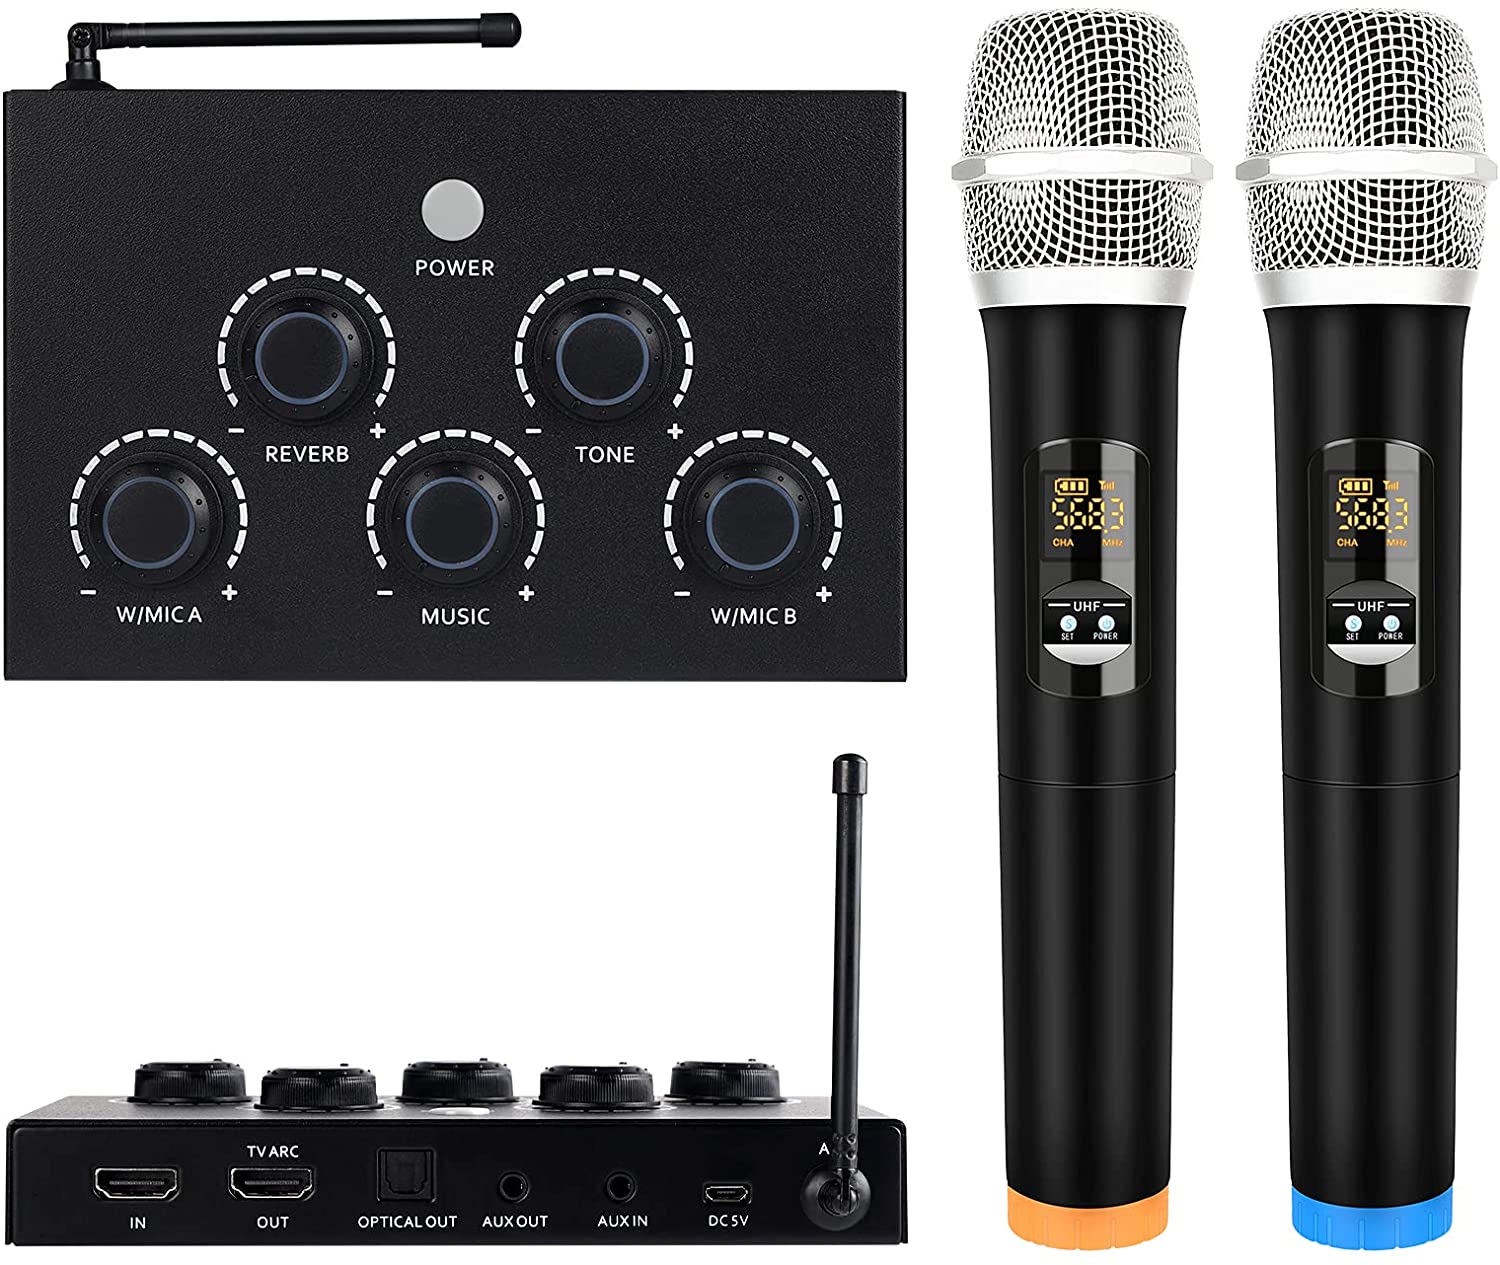 Portable Karaoke Microphone Mixer System Set, with Dual UHF Wireless Mic, HDMI-ARC / Optical / AUX & HDMI in/Out in Singing Receiver for Smart TV, PC, KTV, Home Theater, Amplifier, Speaker